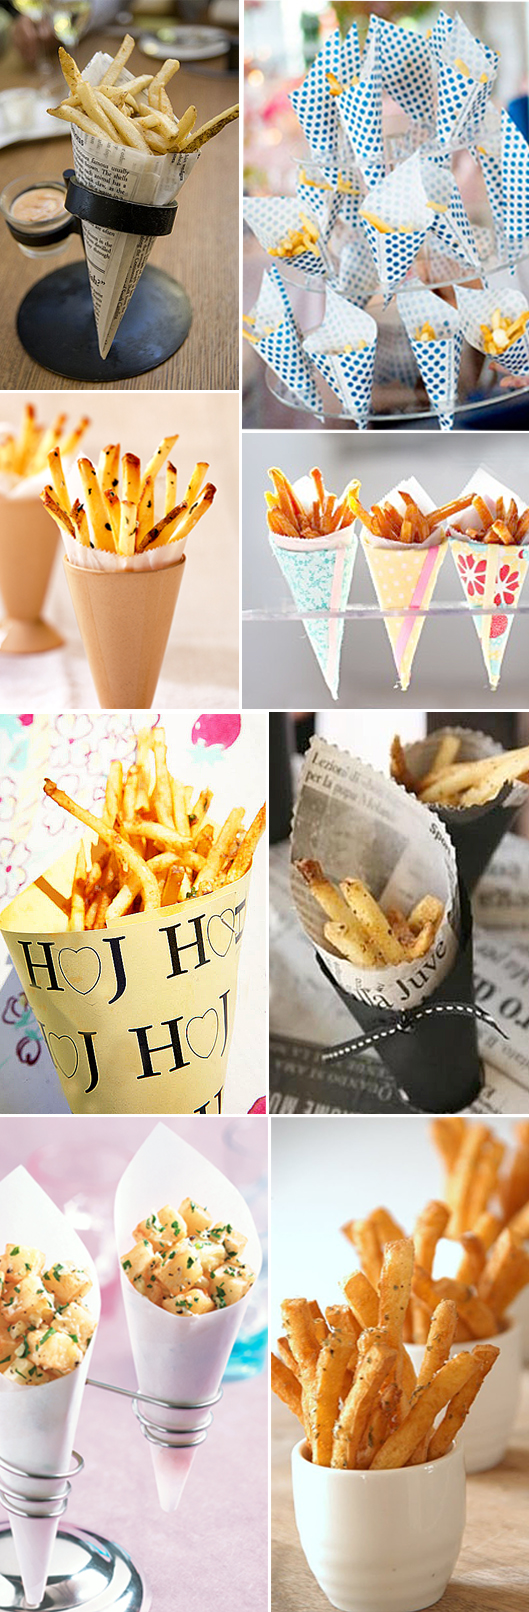 French Fries Served in Cups and Cones